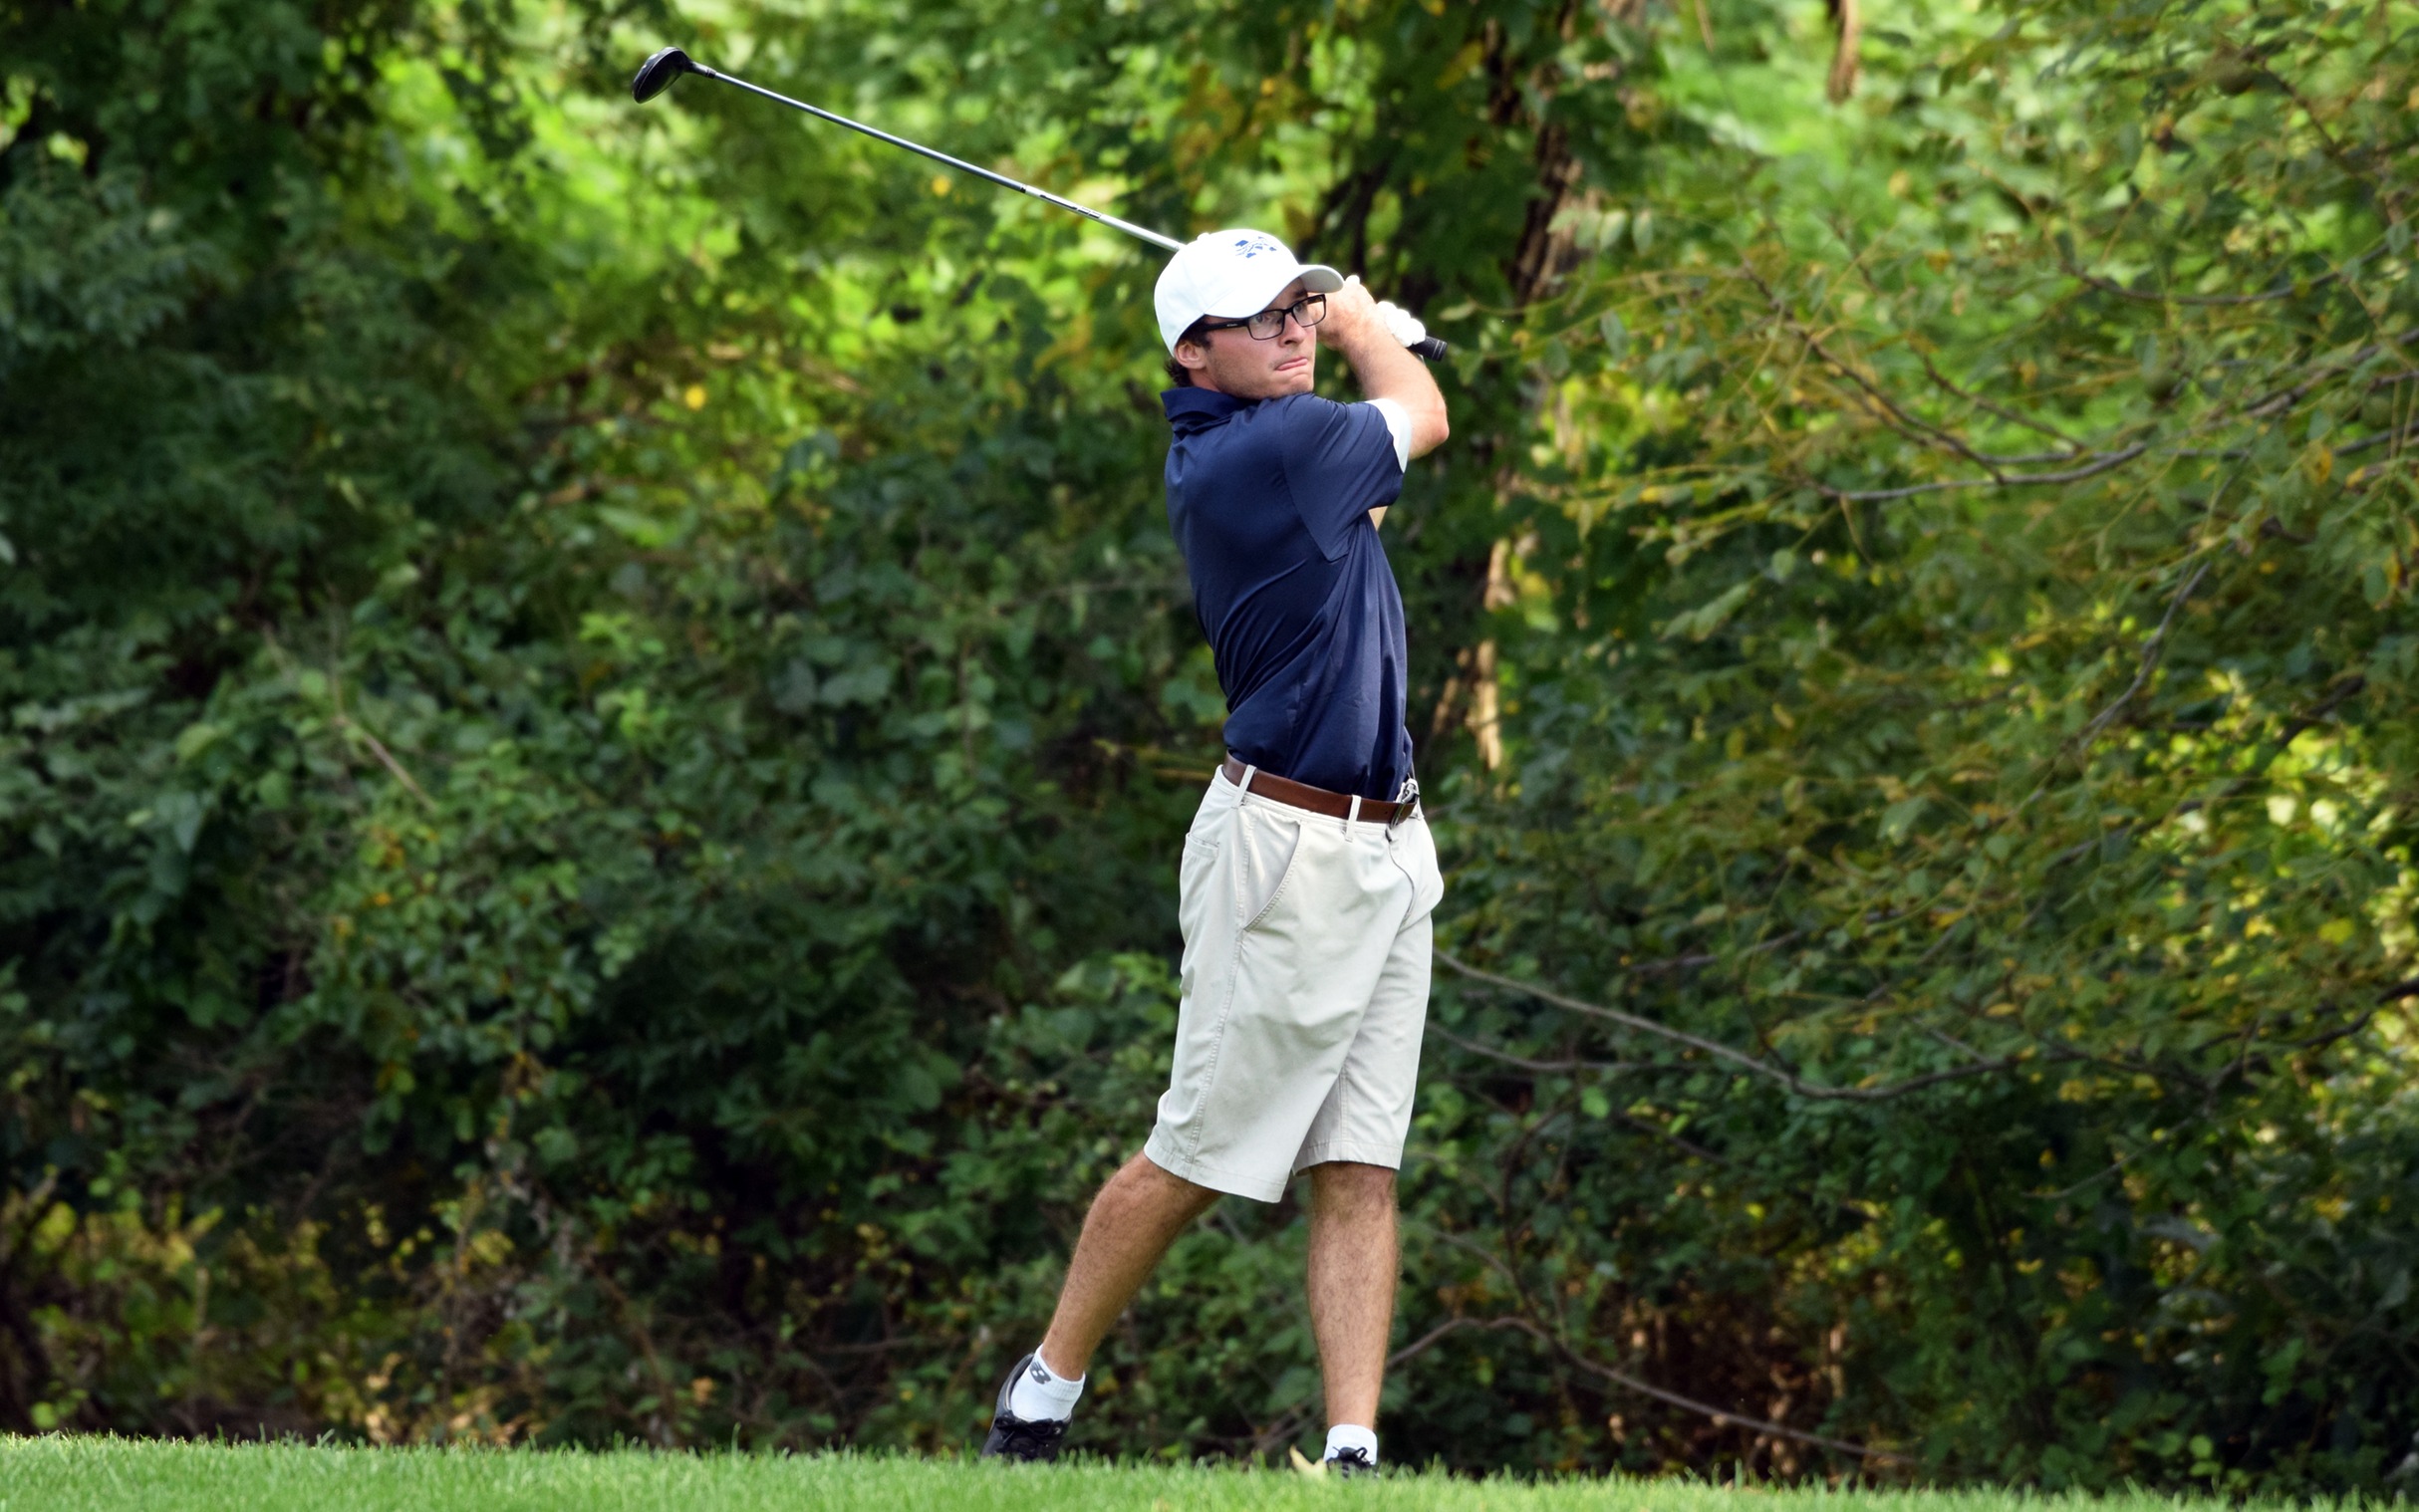 Junior Andrew Hozza tees off during the Weyhill Classic at Saucon Valley Country Club.